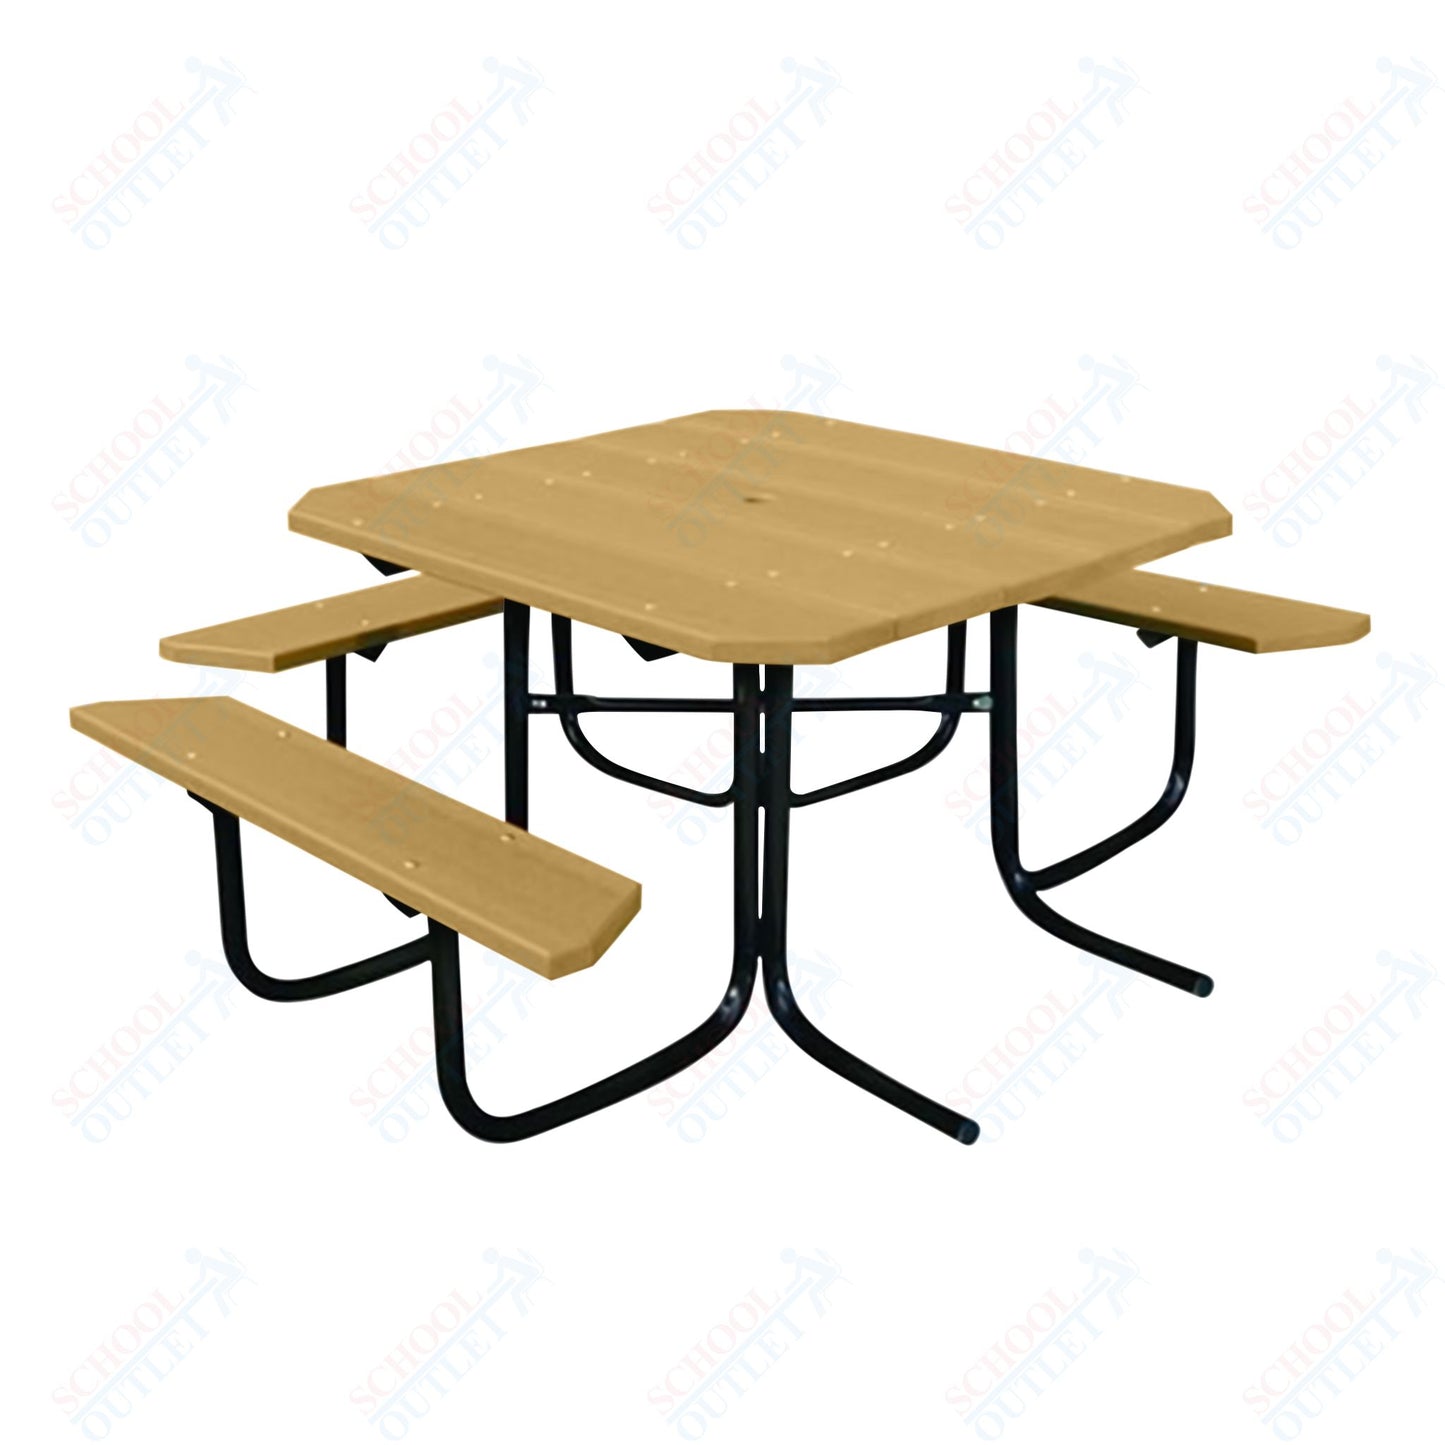 UltraPlay 48" Wood Finish ADA Square Table with 3-seat